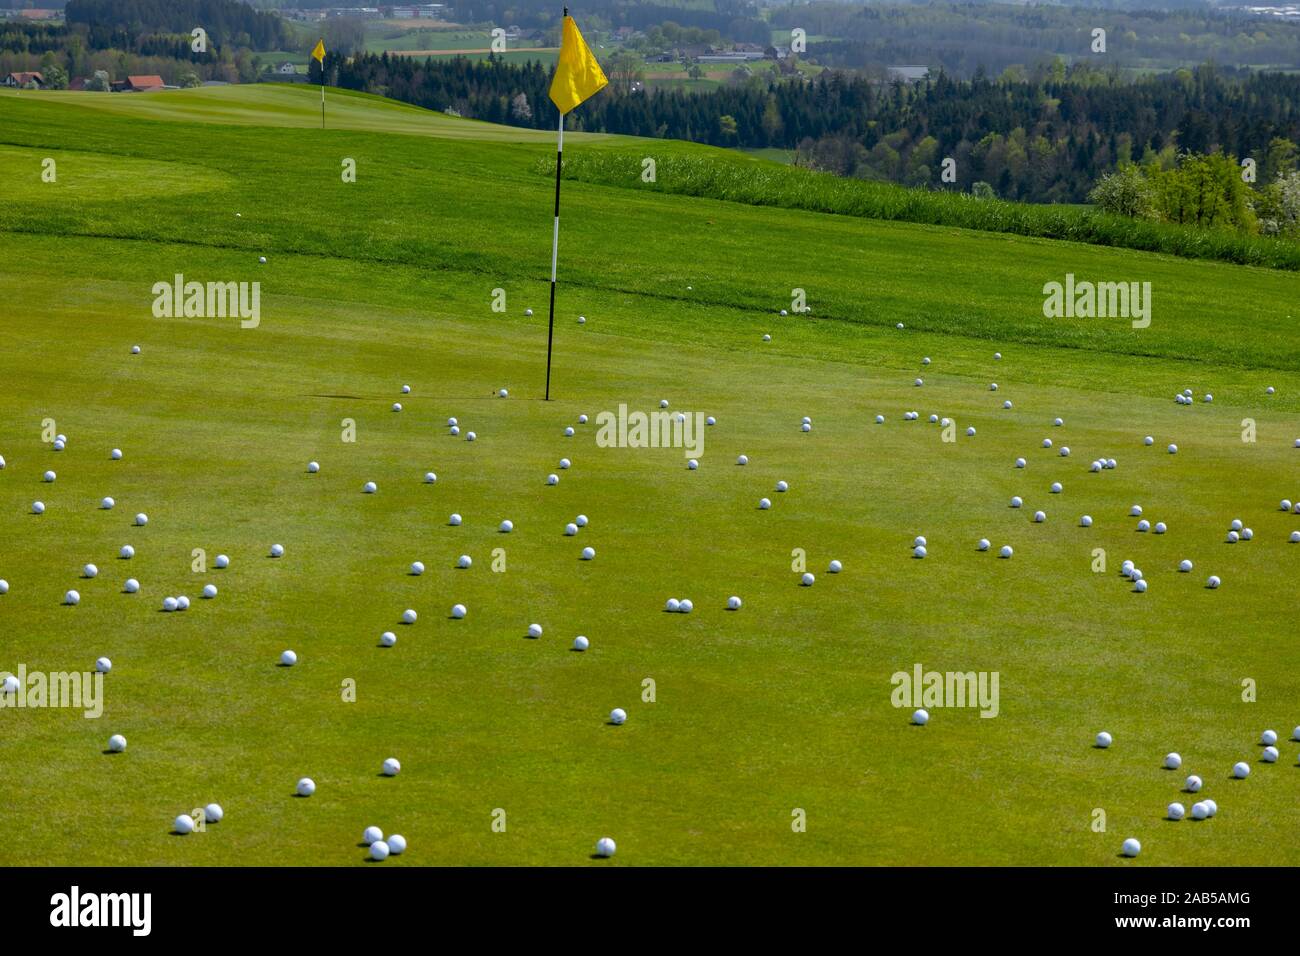 Golf Green with Flag Stick and Many Golf Balls in Switzerland. Stock Photo